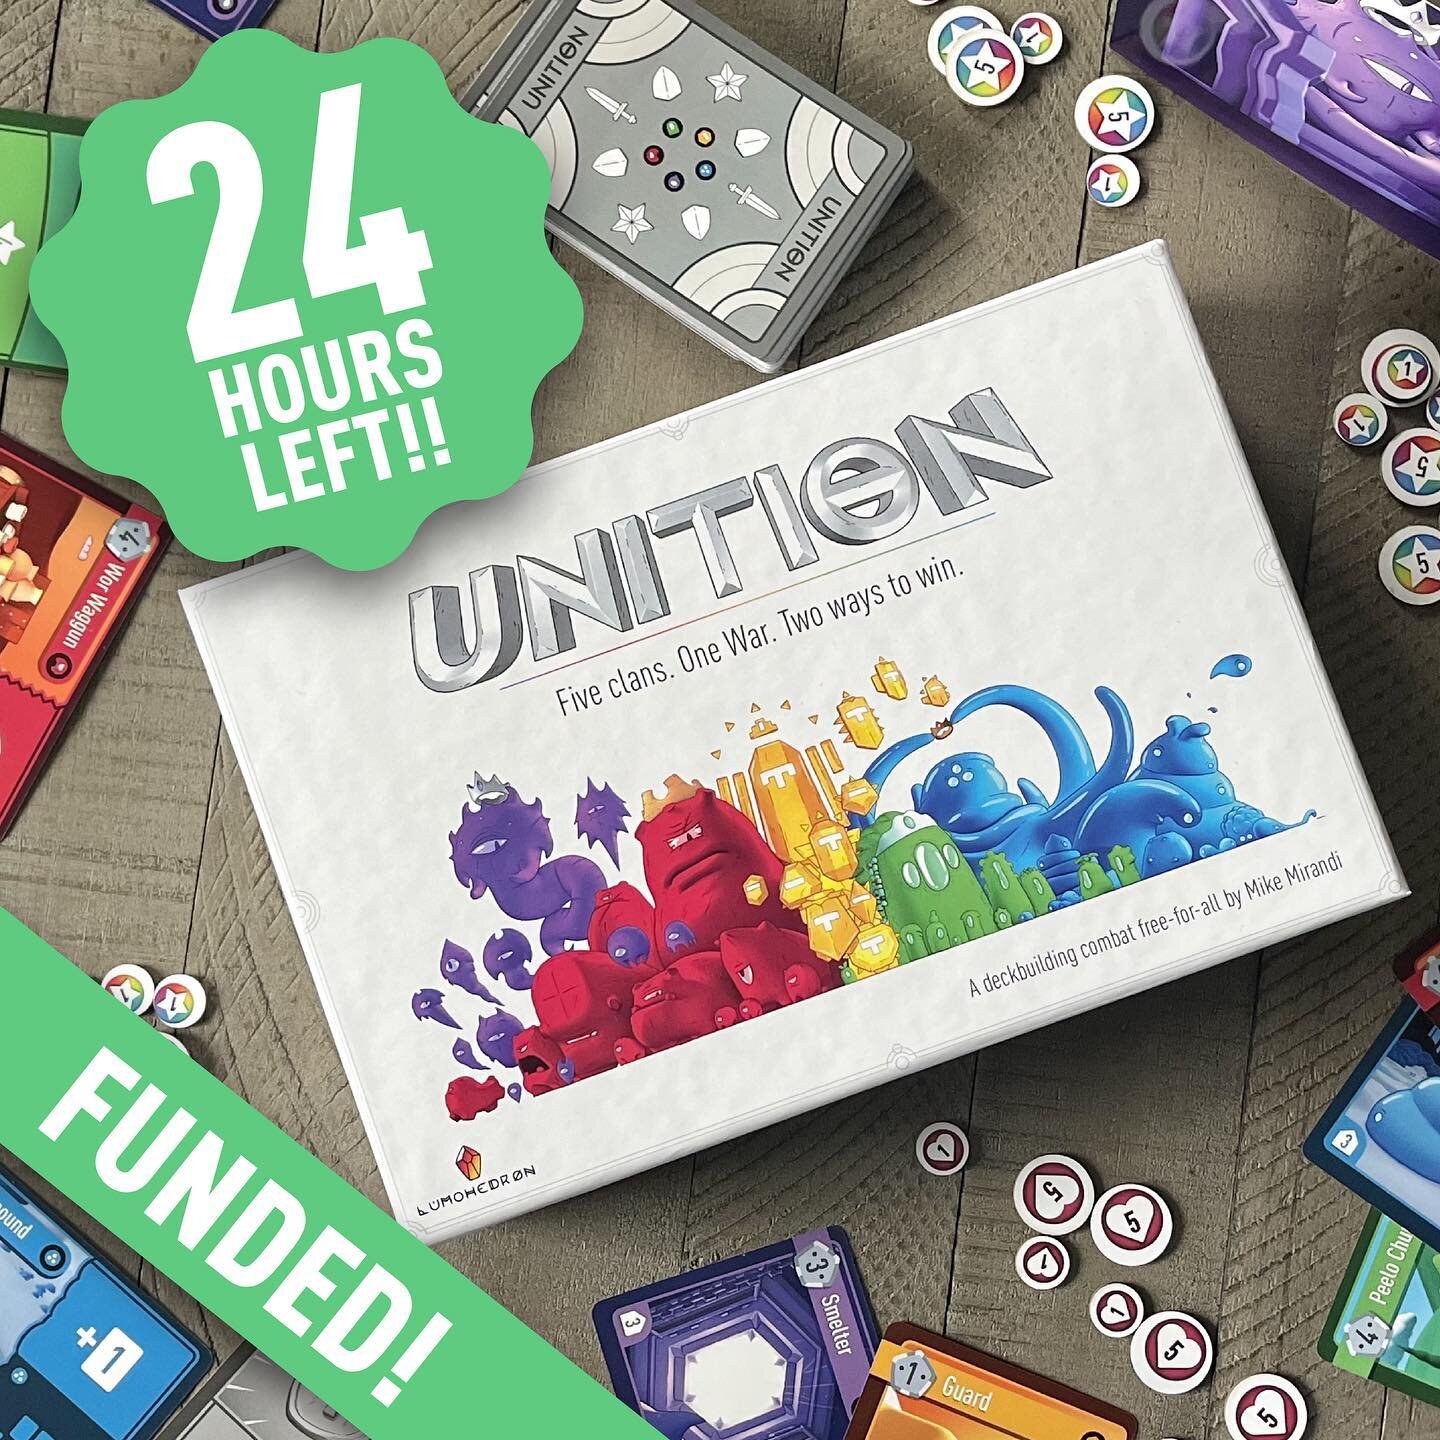 LESS THAN 24 HOURS LEFT!

The official end of the Unition campaign will be tomorrow, April 14th, at 10am. While there will be late pledge options open afterward, it'll be at retail price, so make sure you jump in before it's over if you want the Kick